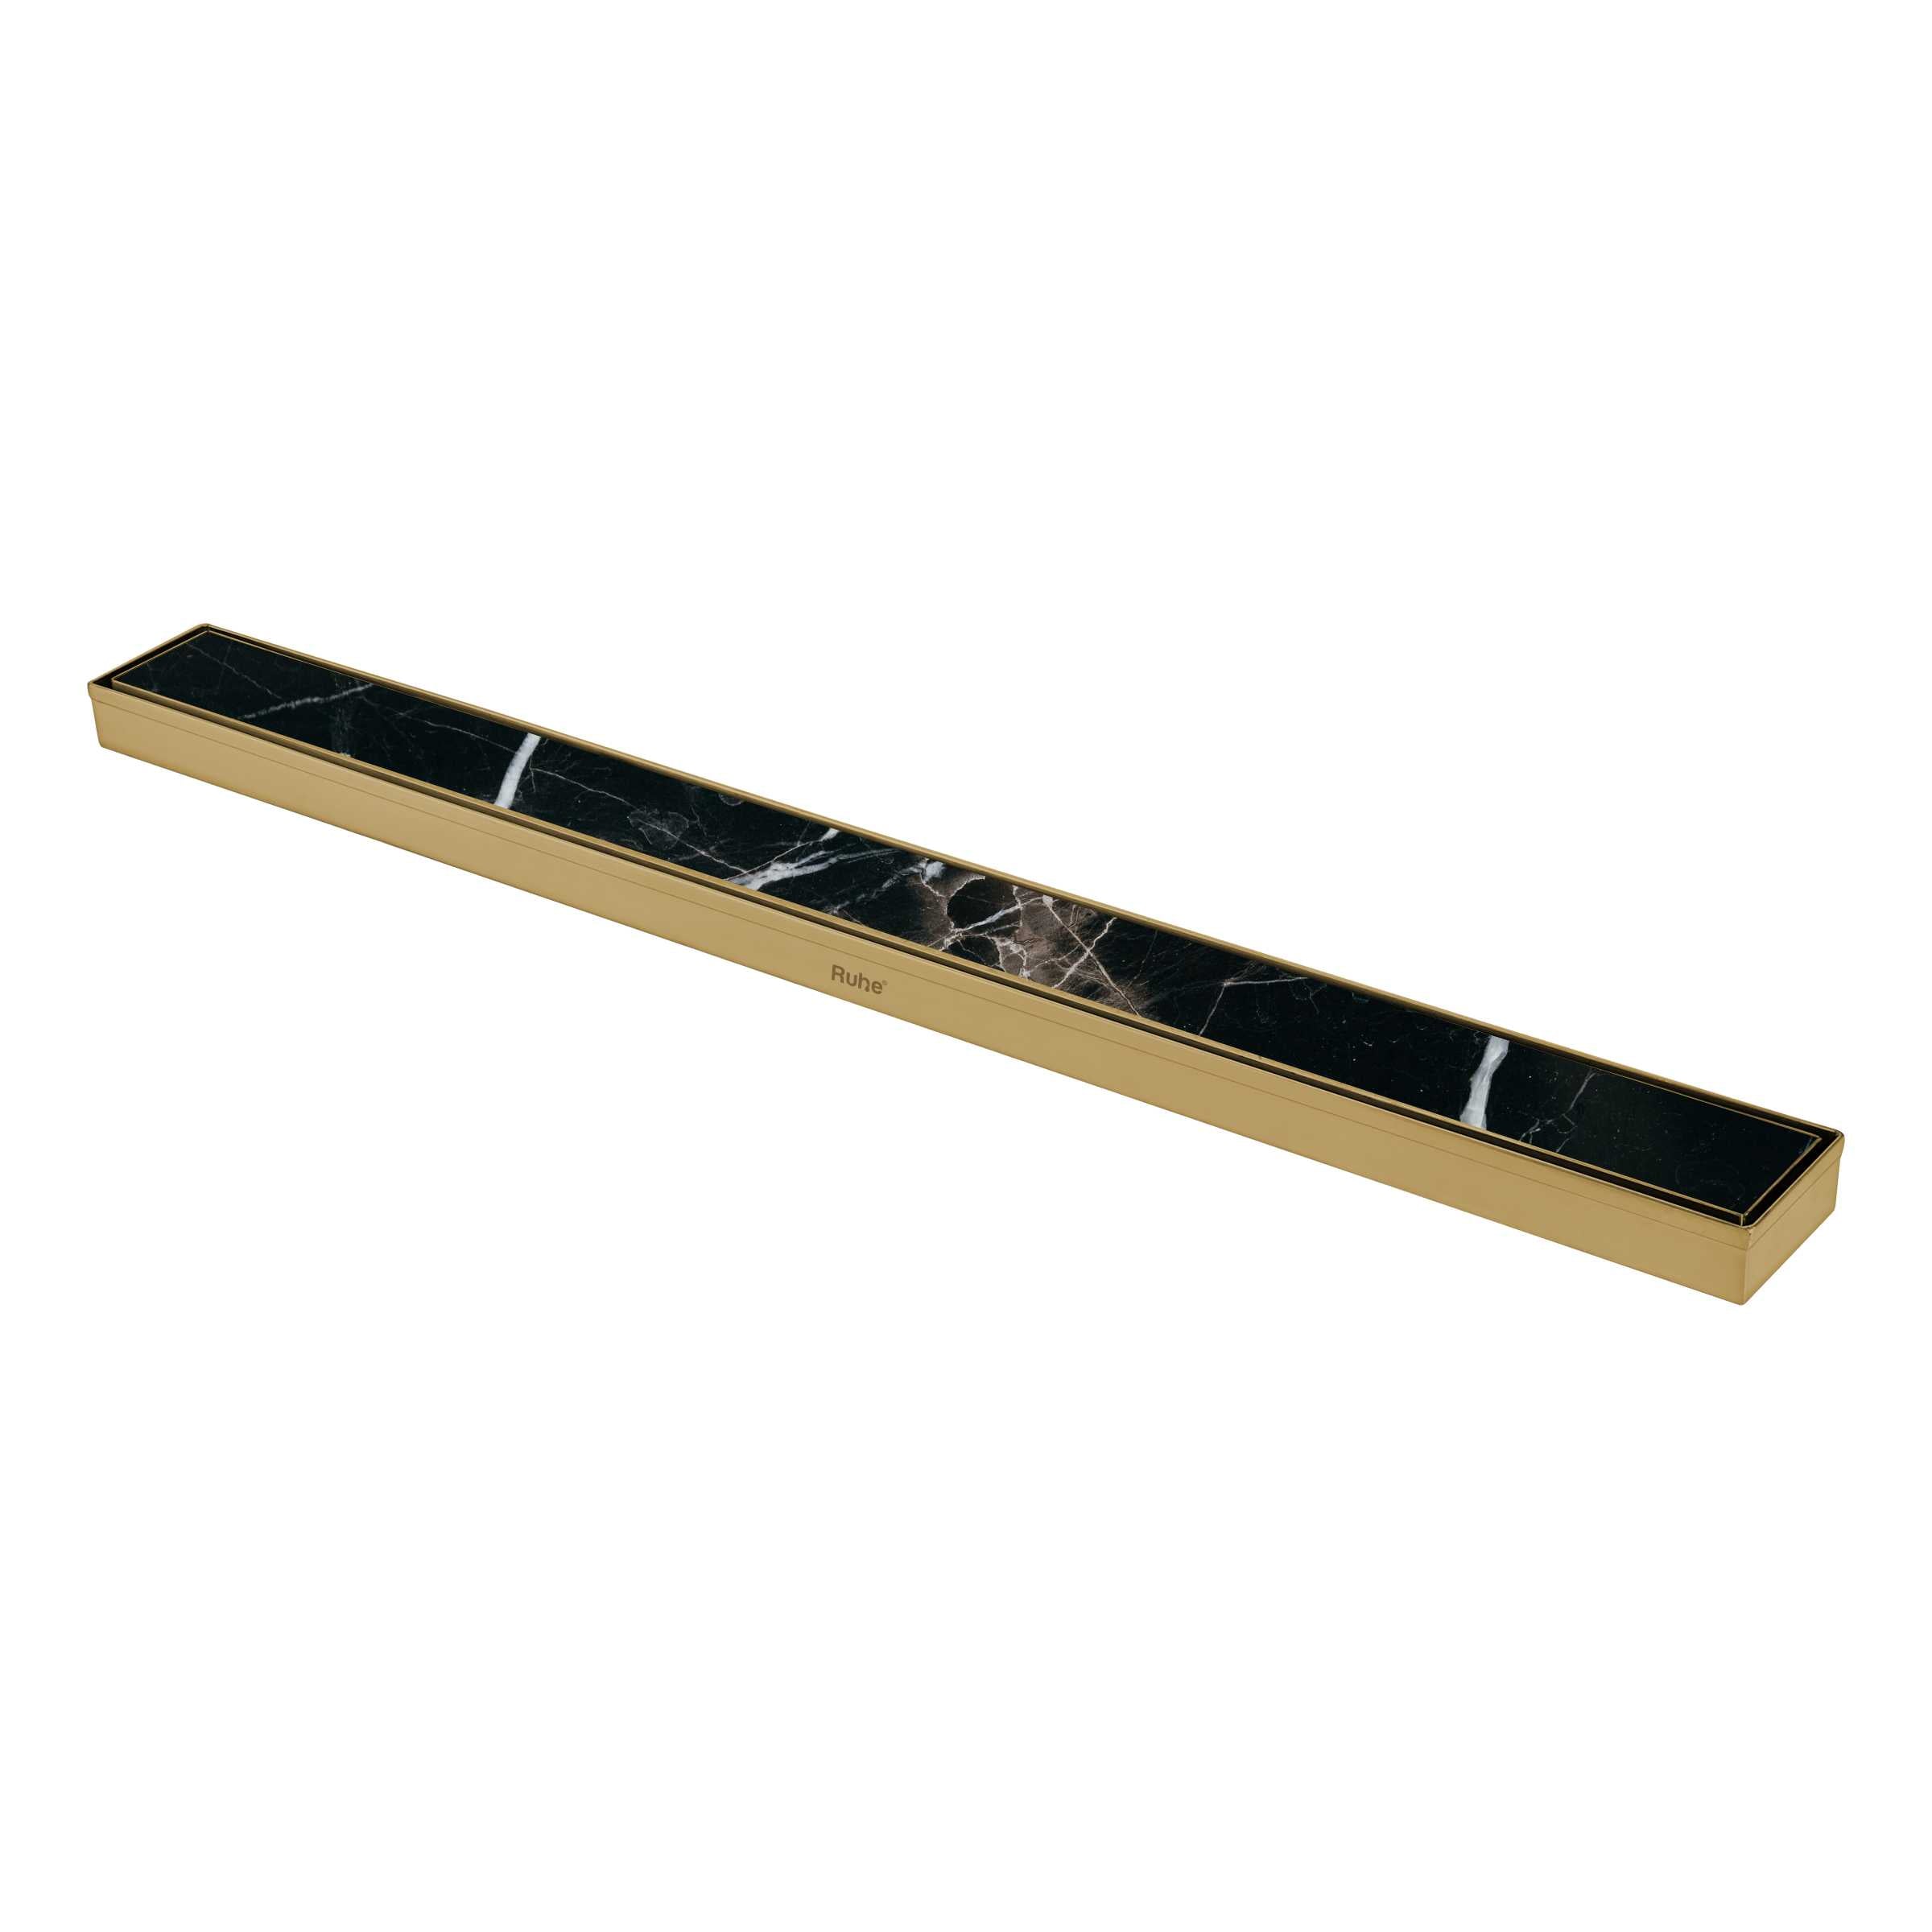 Tile Insert Shower Drain Channel (36 x 2 Inches) YELLOW GOLD